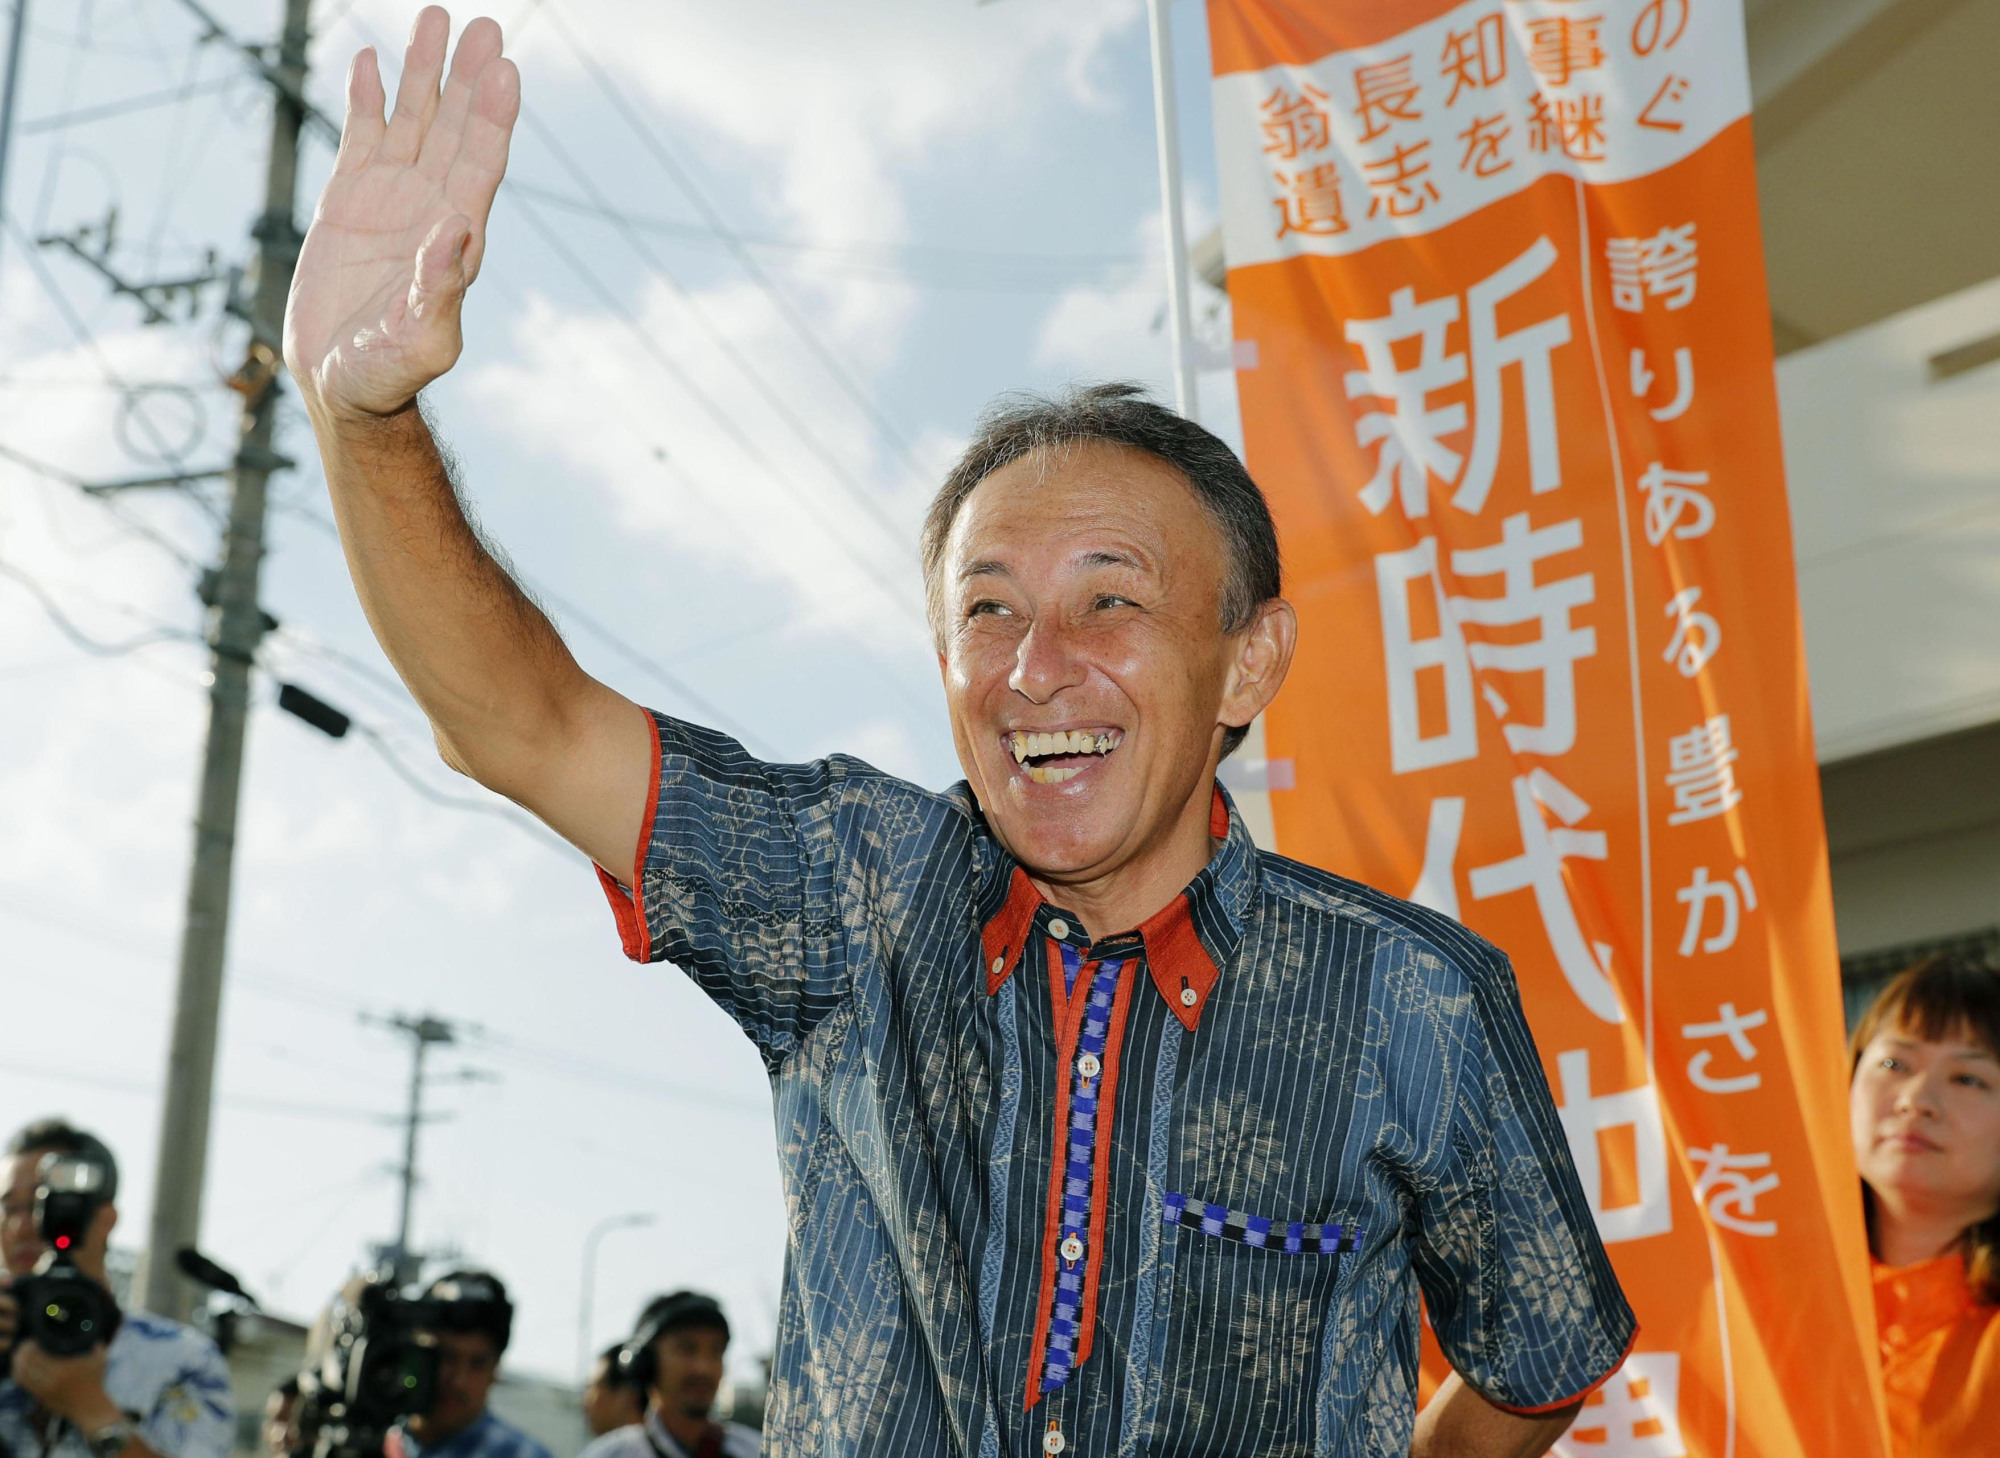 New Okinawa Gov. Denny Tamaki thanks voters Monday morning in the city of Okinawa, a day after winning the gubernatorial election. | KYODO